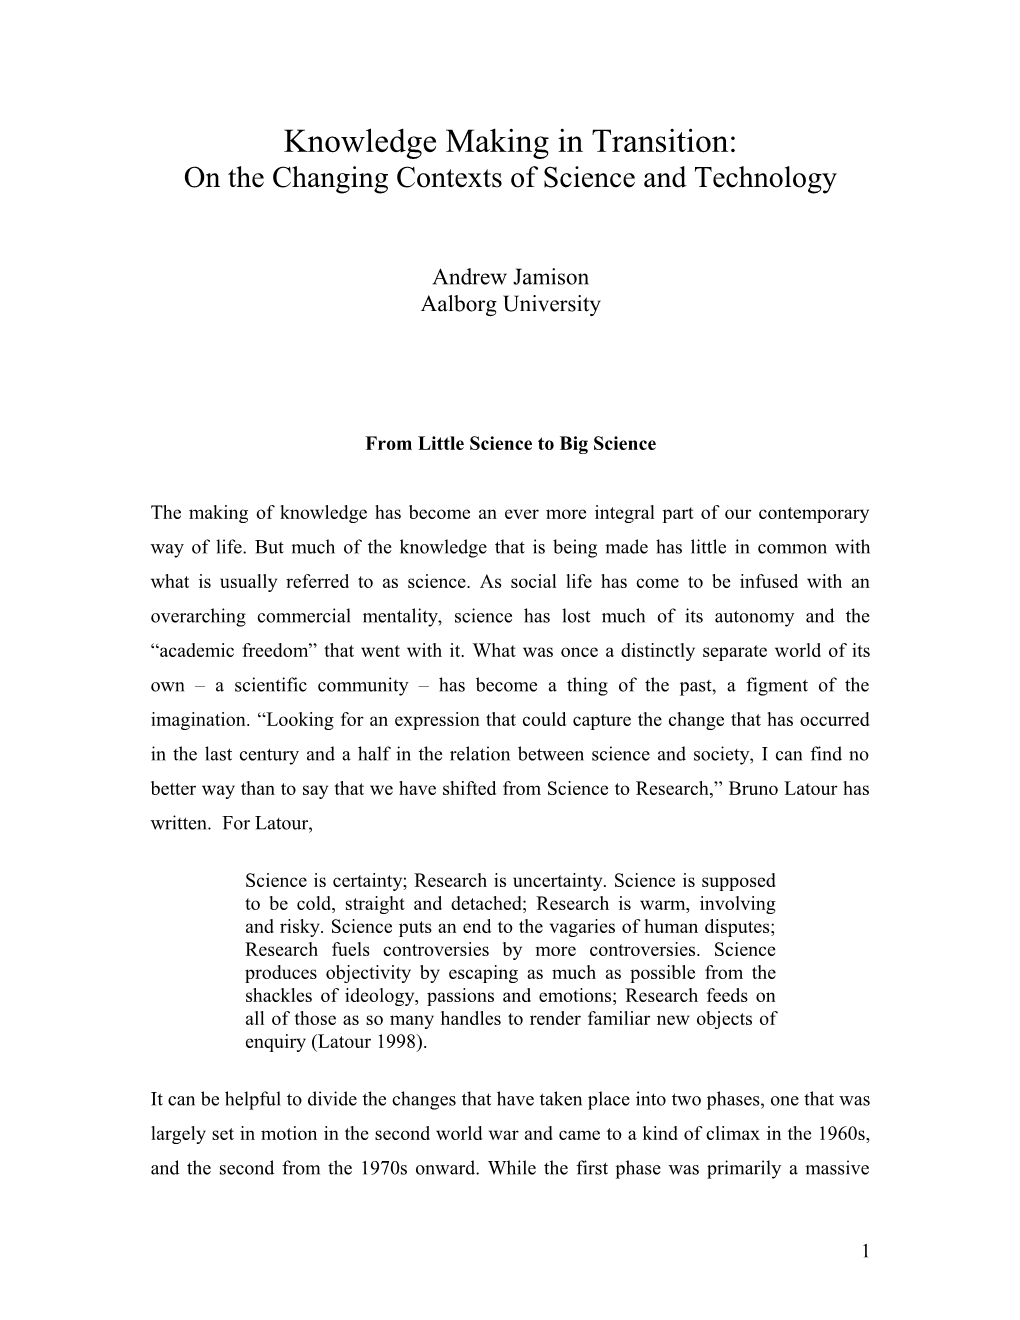 On the Changing Contexts of Science and Technology